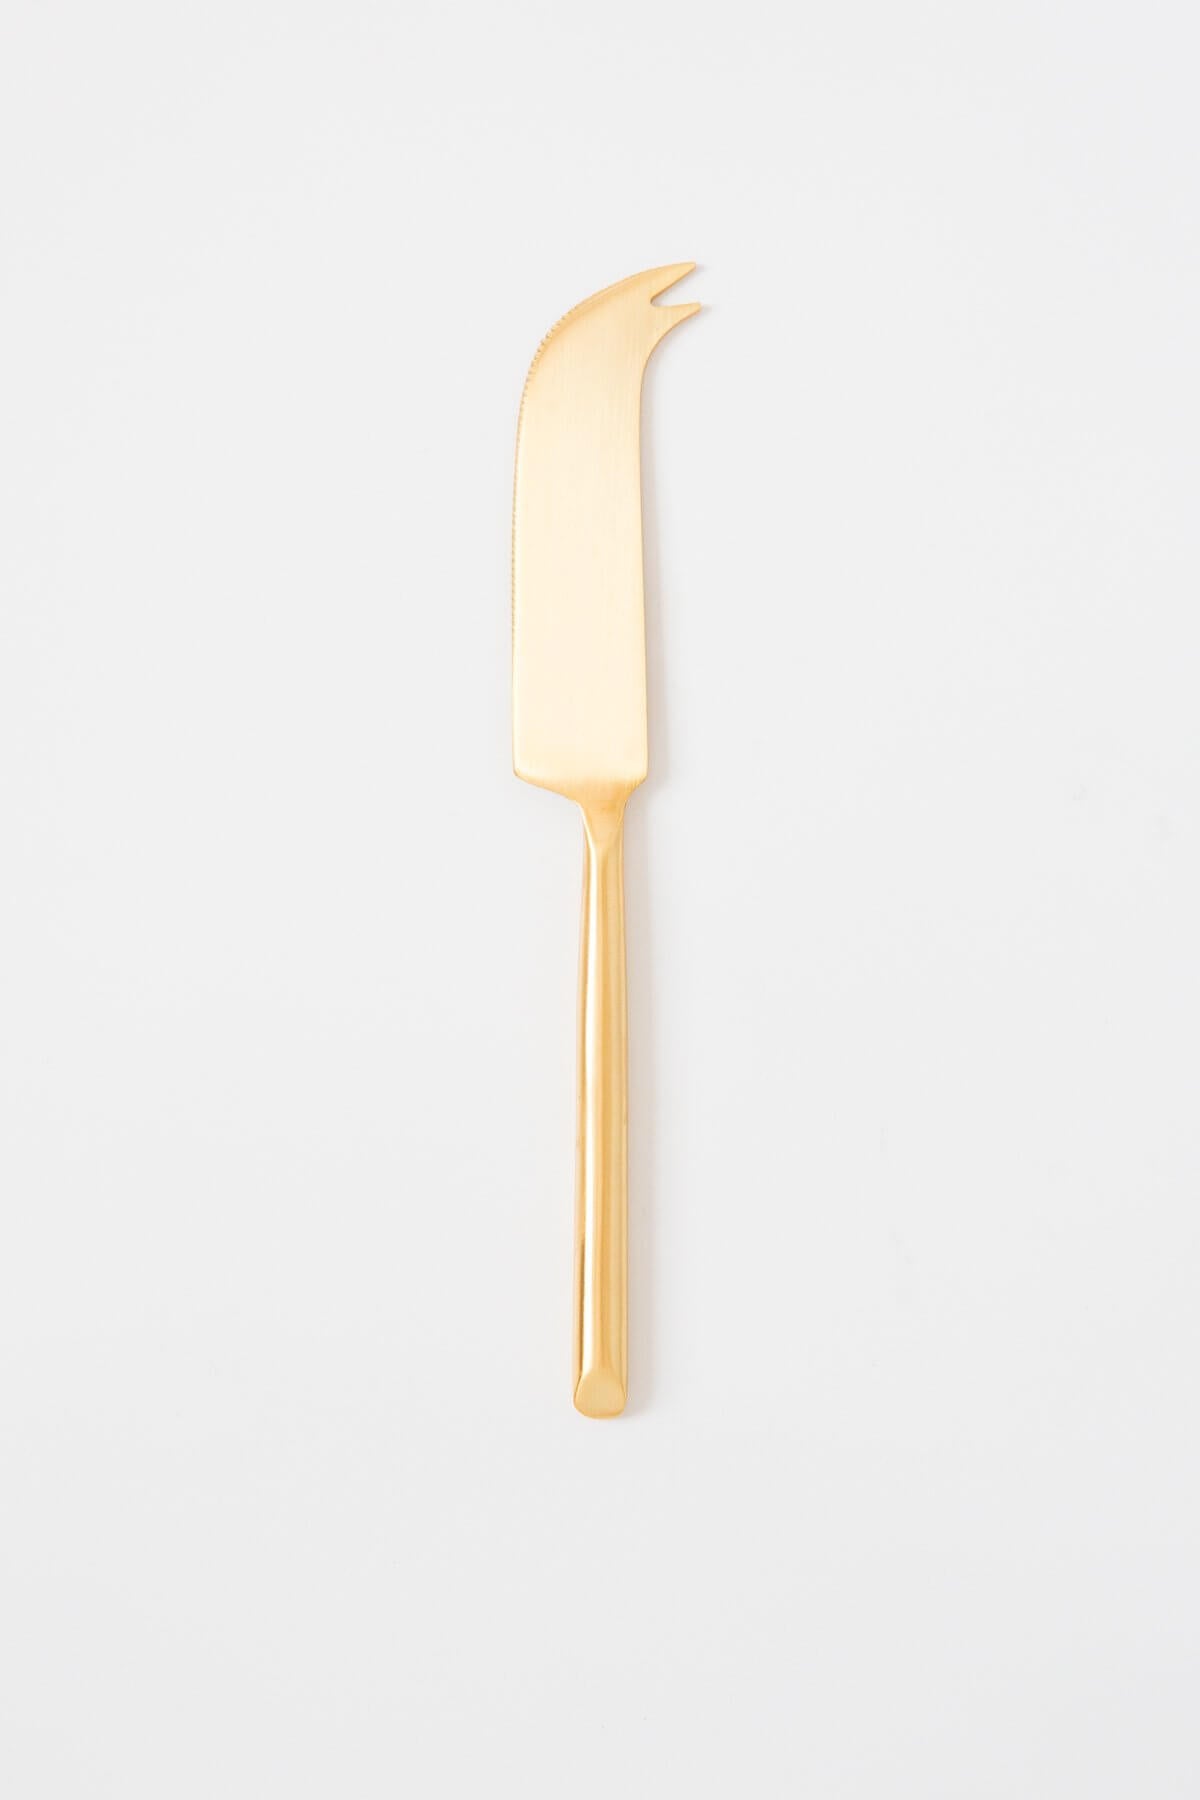 Be Home Matte Gold Cheese Knife